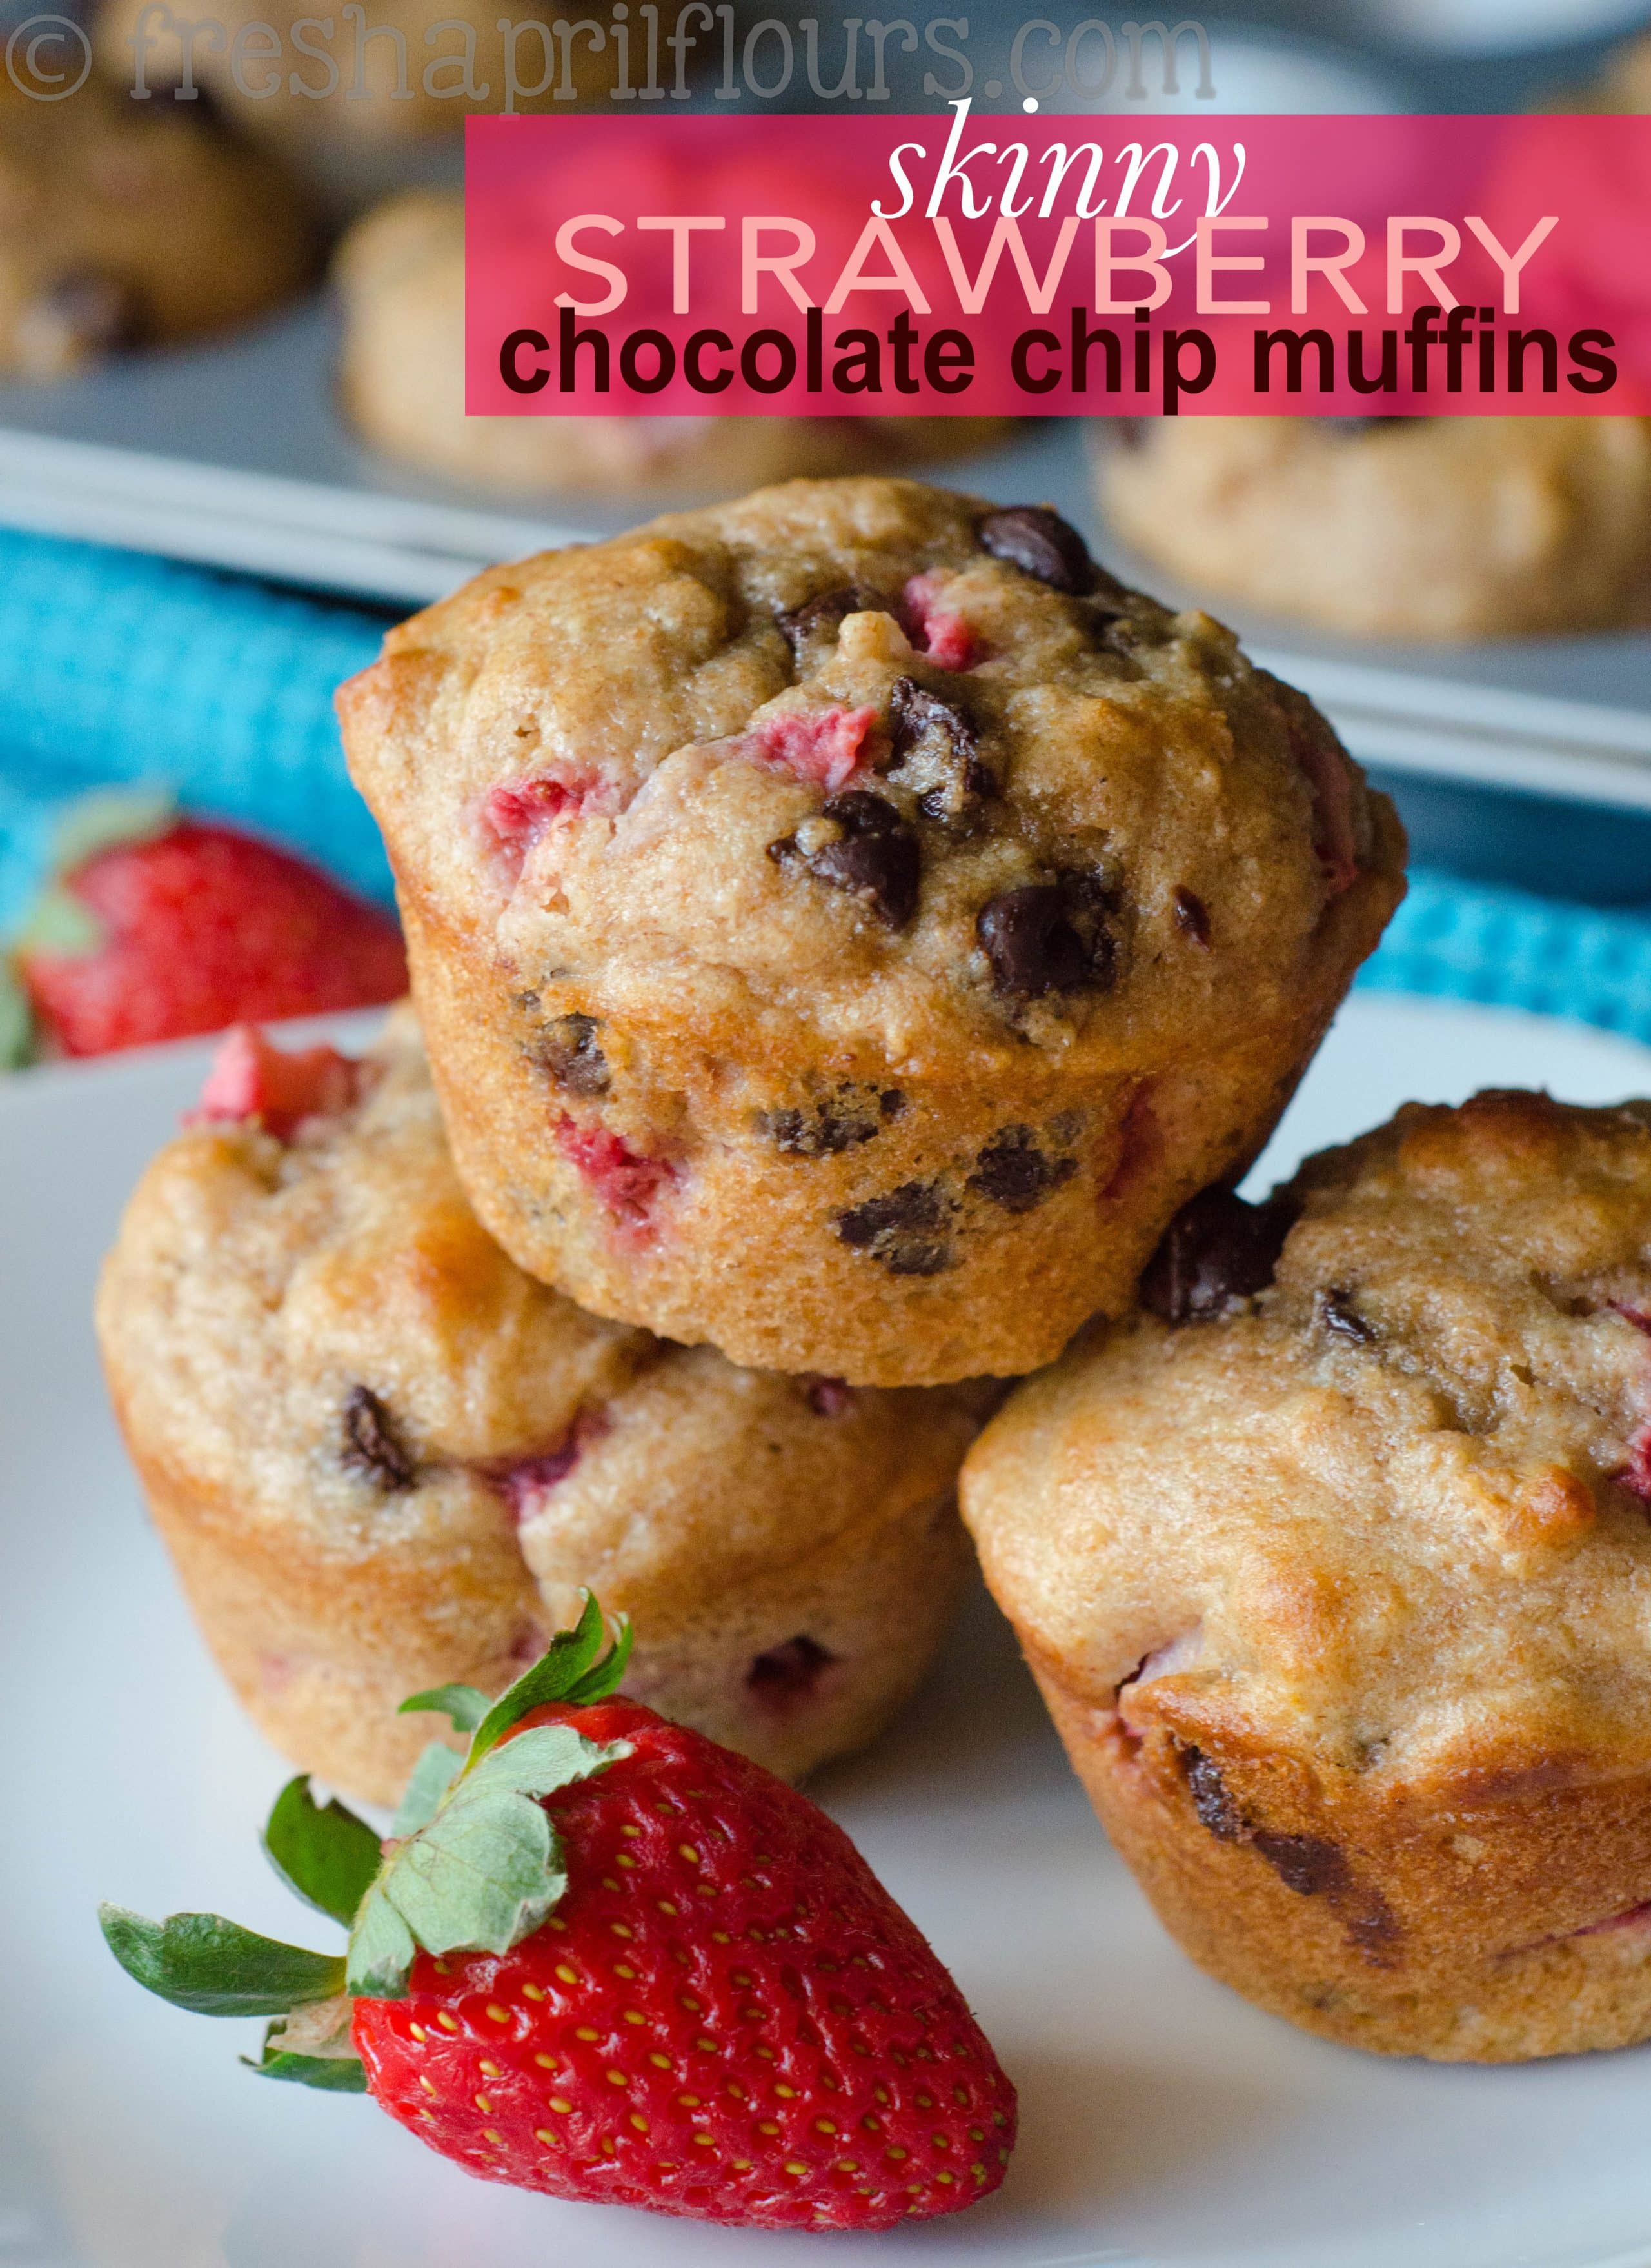 Chocolate chip muffins bursting with fresh strawberries. No oil, no butter, but no sacrifice of flavor! via @frshaprilflours